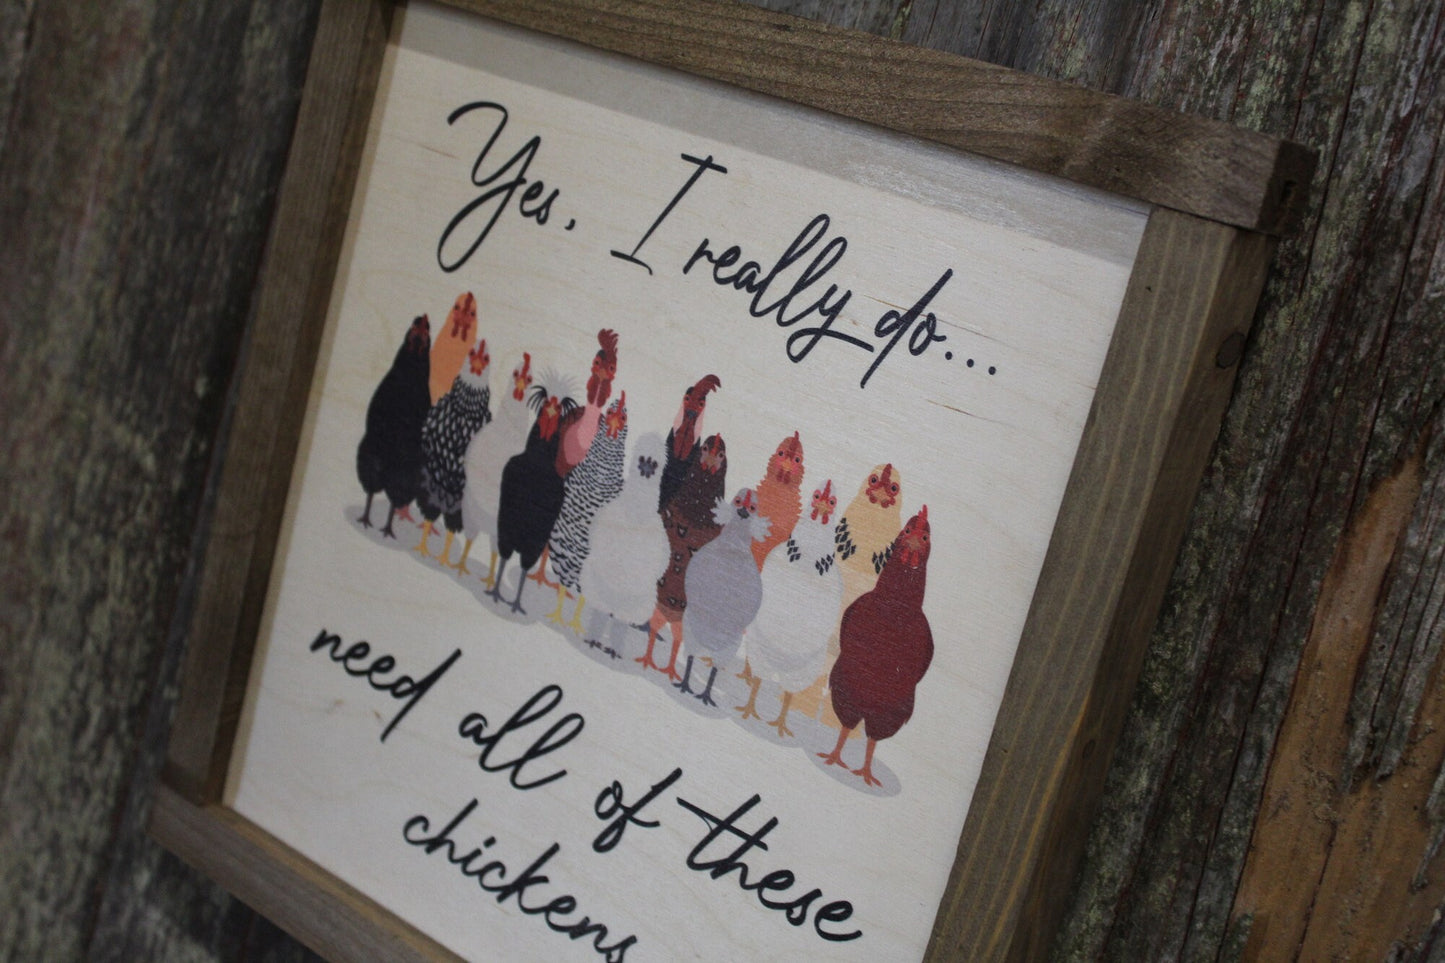 Chicken Wood Sign Yes I Need All These Chickens Silly Brown Framed Print Silkie Rhode Island Red Rooster Wall Art Farmhouse Primitive Rustic